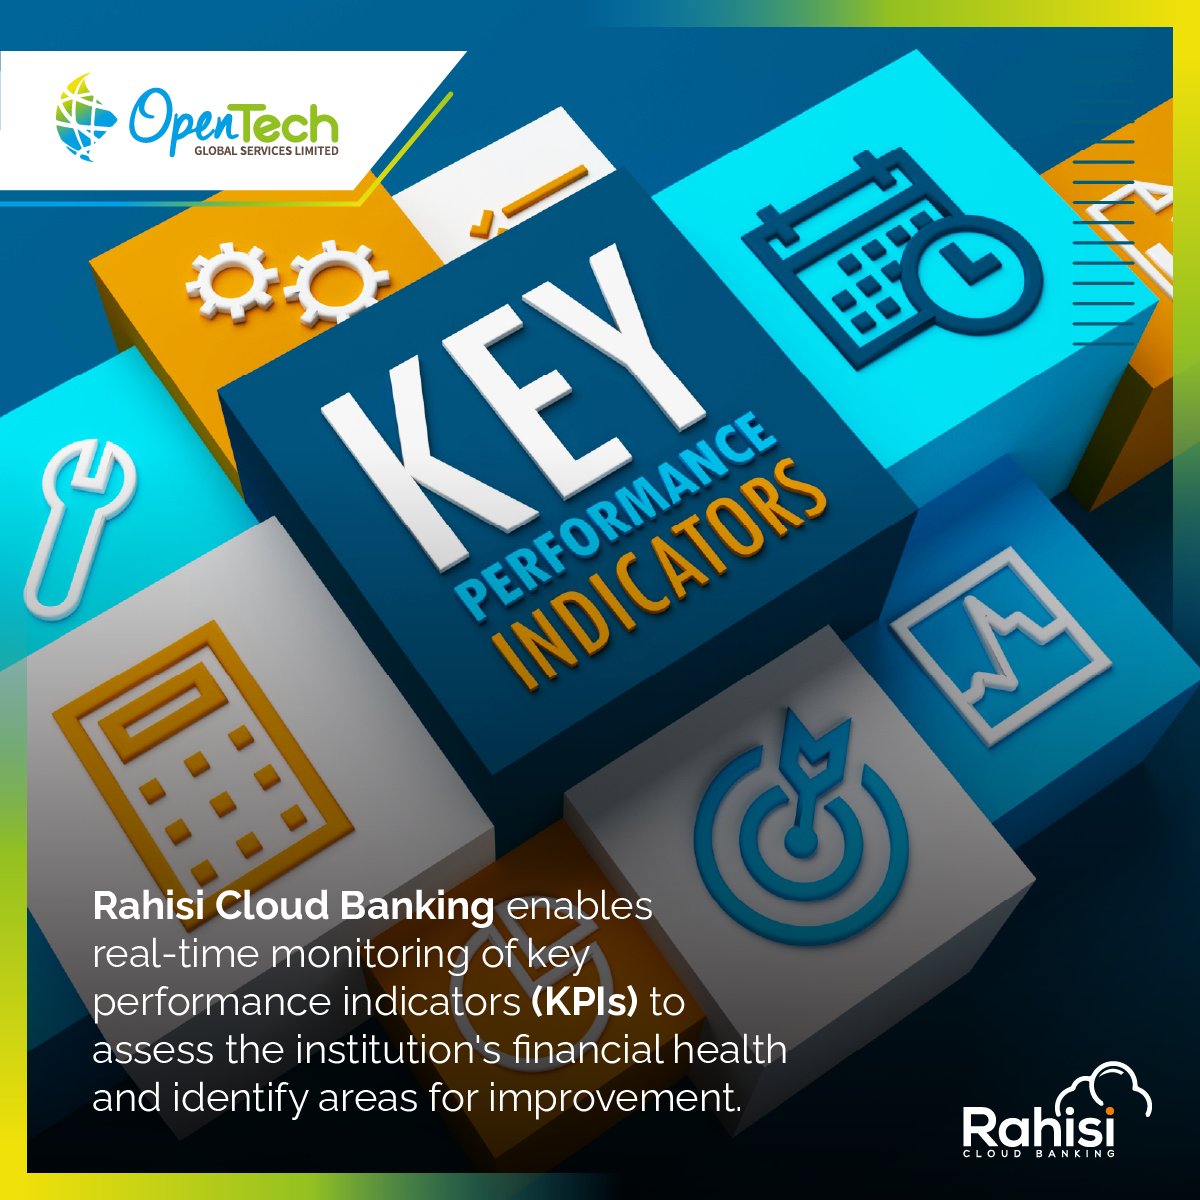 Introducing Rahisi Cloud Banking, we optimize every step for your financial institution's success, from loan origination to repayment, with KPI monitoring for maximum efficiency and profitability
#Microfinance #KPI #CloudSolution #LoanOrigination #FinancialSuccess #MFI #Safaricom